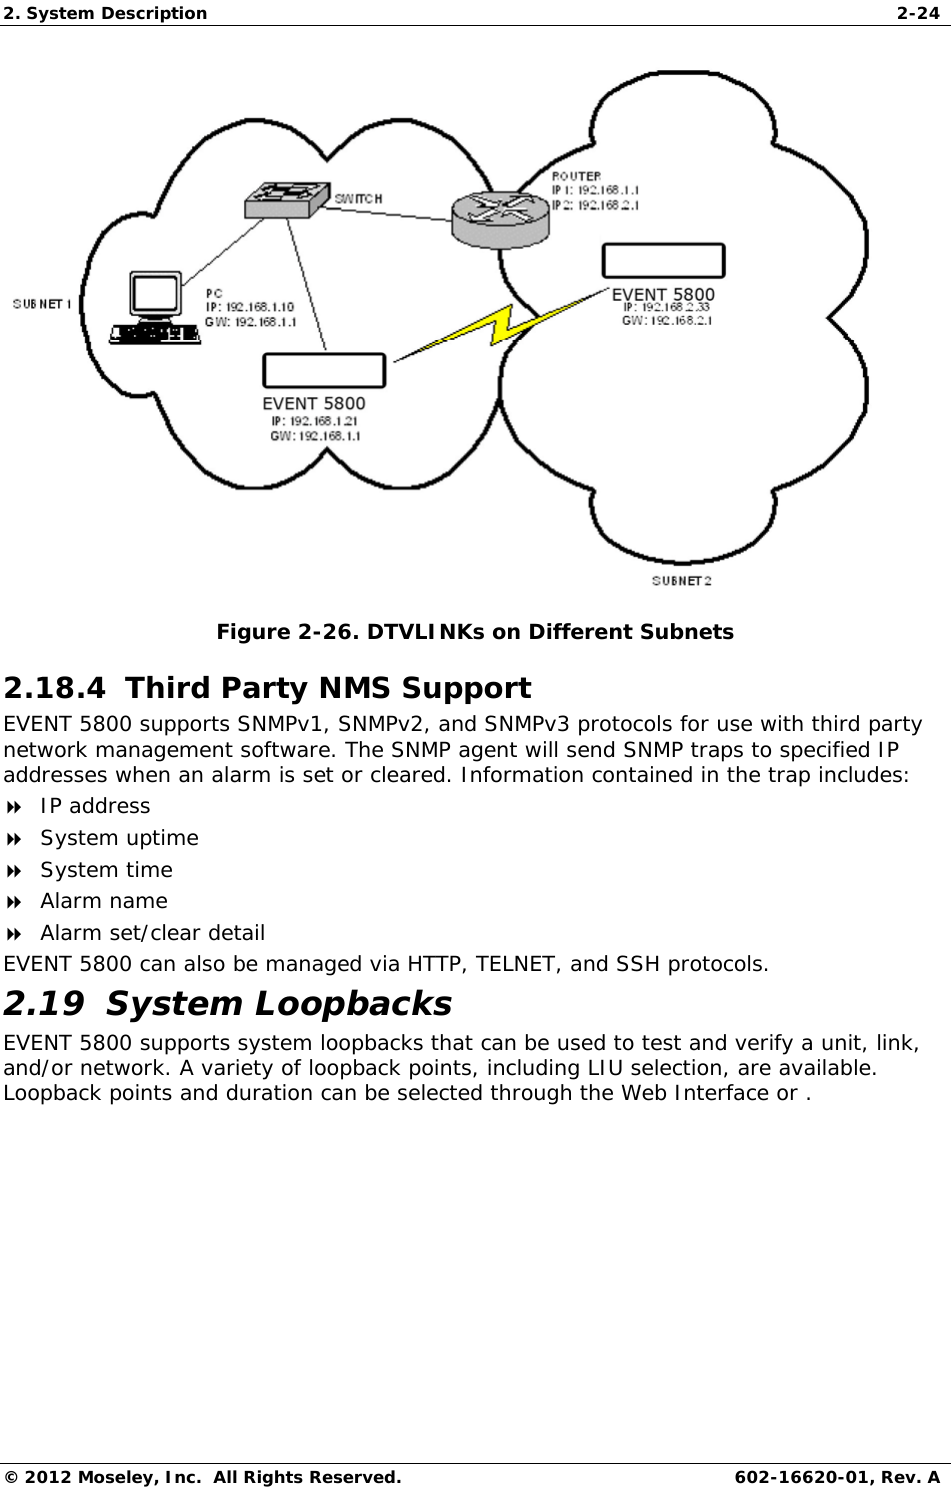 2. System Description  2-24 © 2012 Moseley, Inc.  All Rights Reserved.  602-16620-01, Rev. A  Figure 2-26. DTVLINKs on Different Subnets 2.18.4  Third Party NMS Support EVENT 5800 supports SNMPv1, SNMPv2, and SNMPv3 protocols for use with third party network management software. The SNMP agent will send SNMP traps to specified IP addresses when an alarm is set or cleared. Information contained in the trap includes:  IP address  System uptime  System time  Alarm name  Alarm set/clear detail EVENT 5800 can also be managed via HTTP, TELNET, and SSH protocols. 2.19  System Loopbacks EVENT 5800 supports system loopbacks that can be used to test and verify a unit, link, and/or network. A variety of loopback points, including LIU selection, are available. Loopback points and duration can be selected through the Web Interface or .  